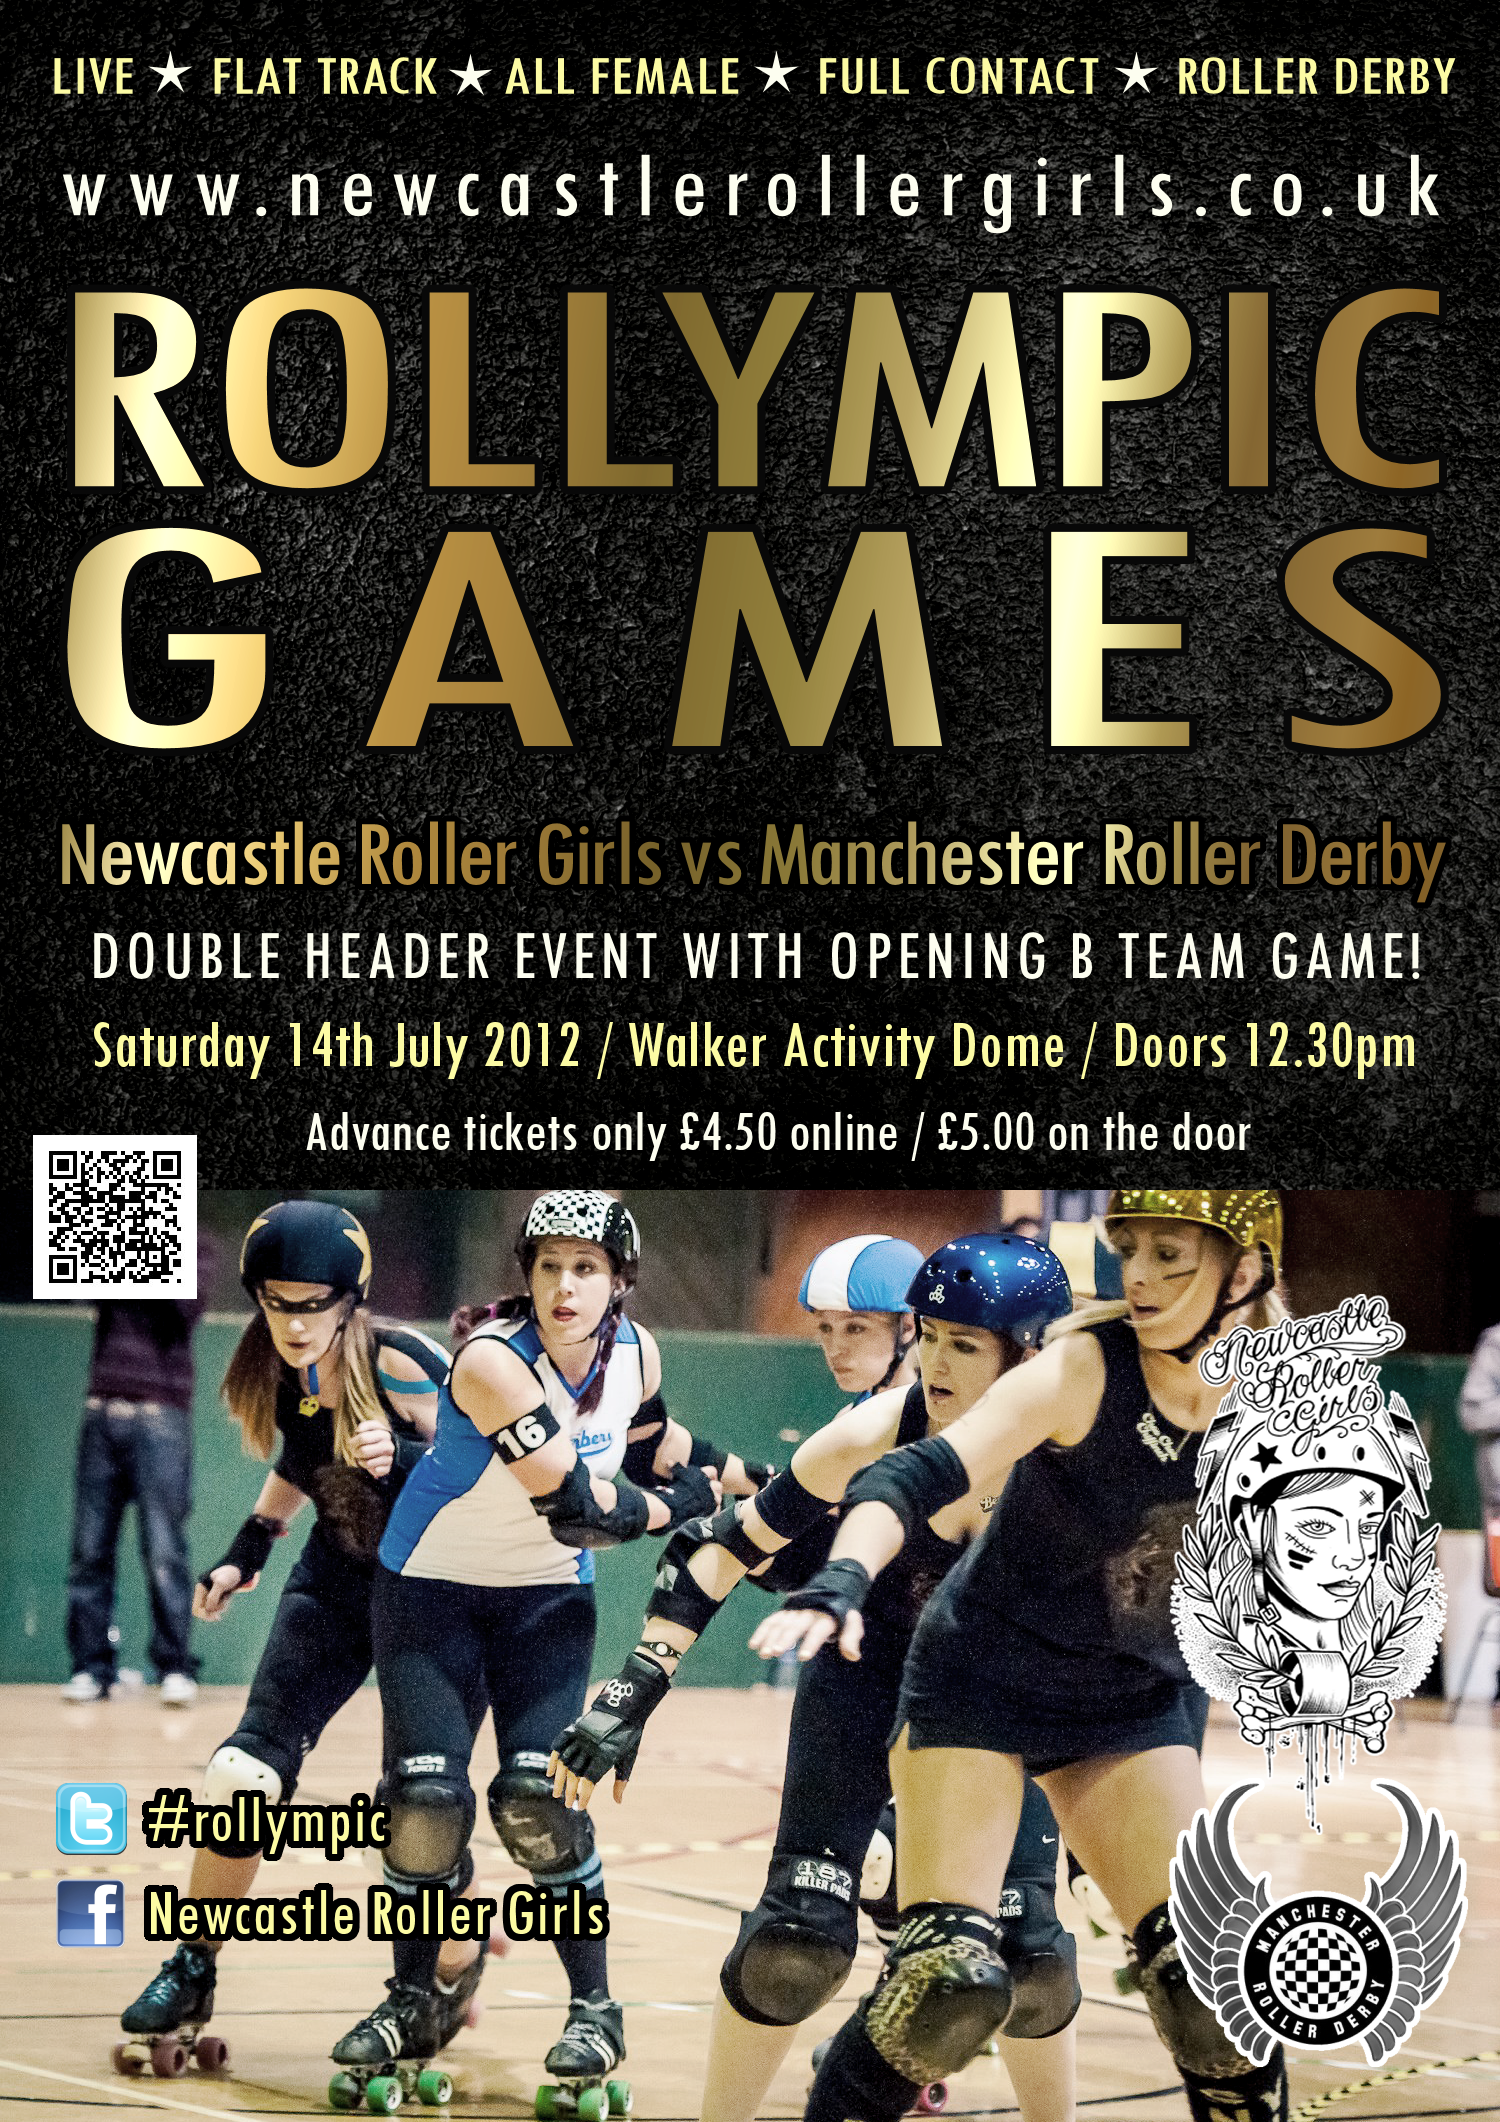 Rollympic Games tickets on sale now!